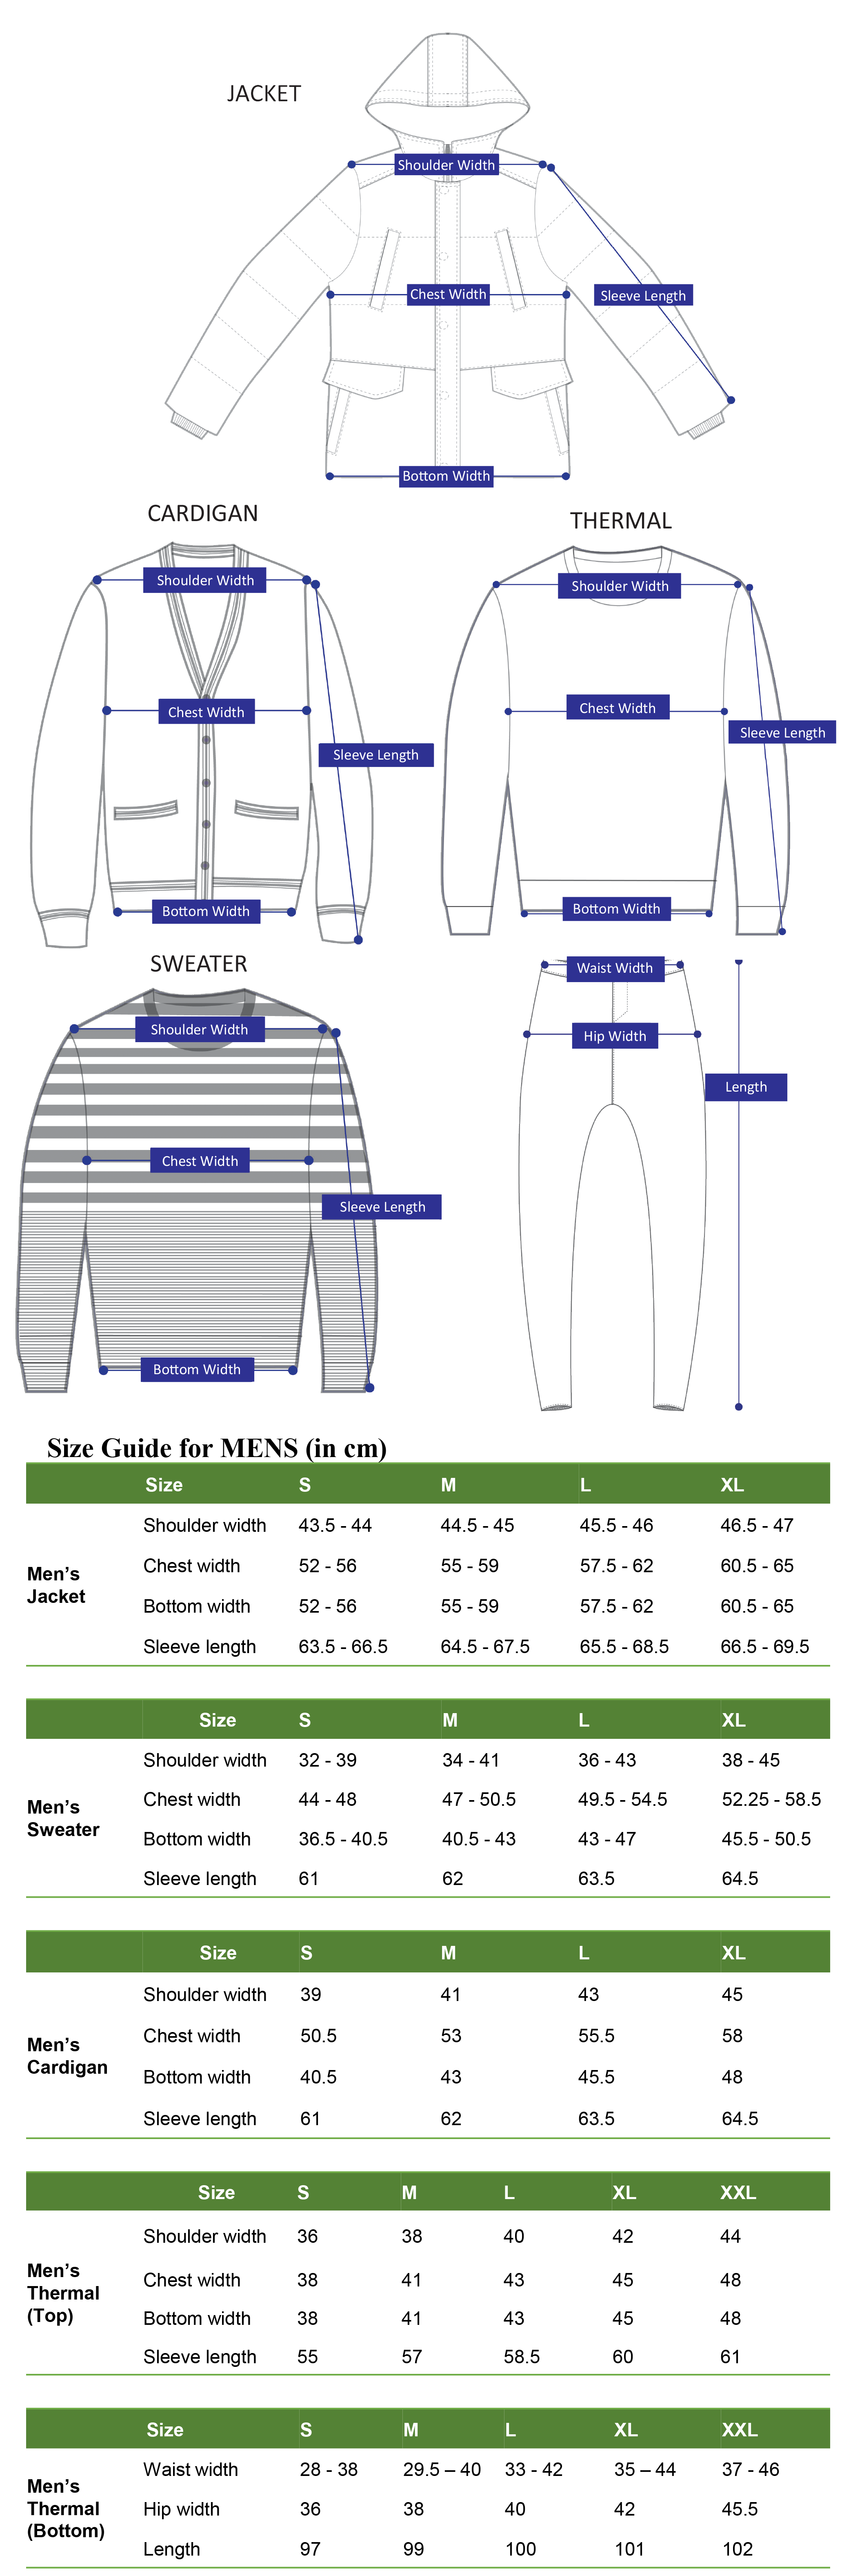 Jacket Sizing Chart | vlr.eng.br